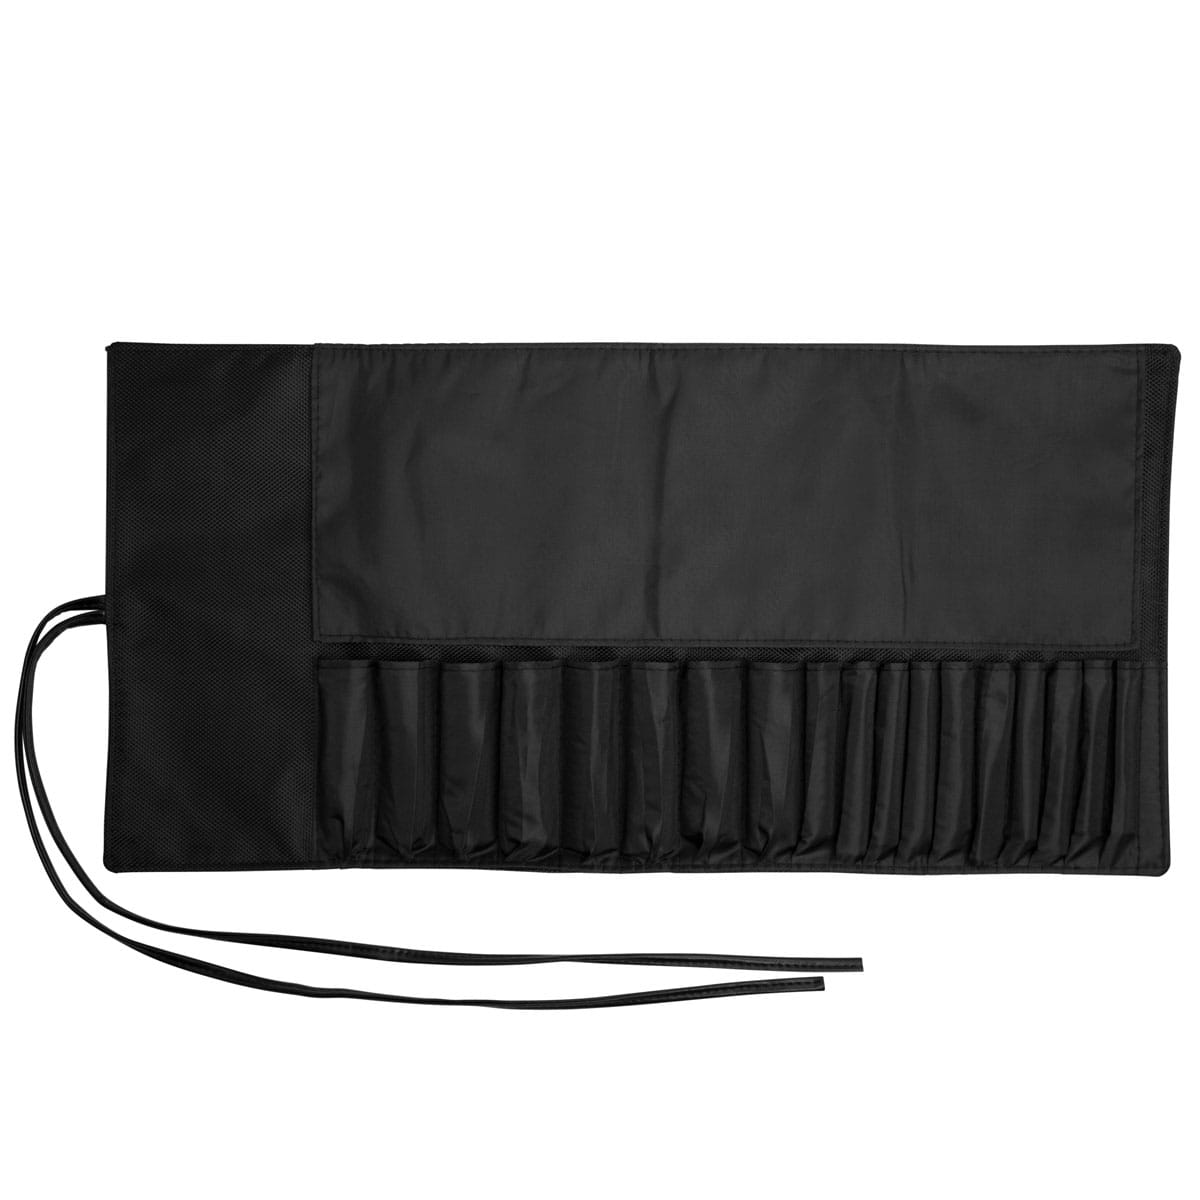 makeup brush roll up case